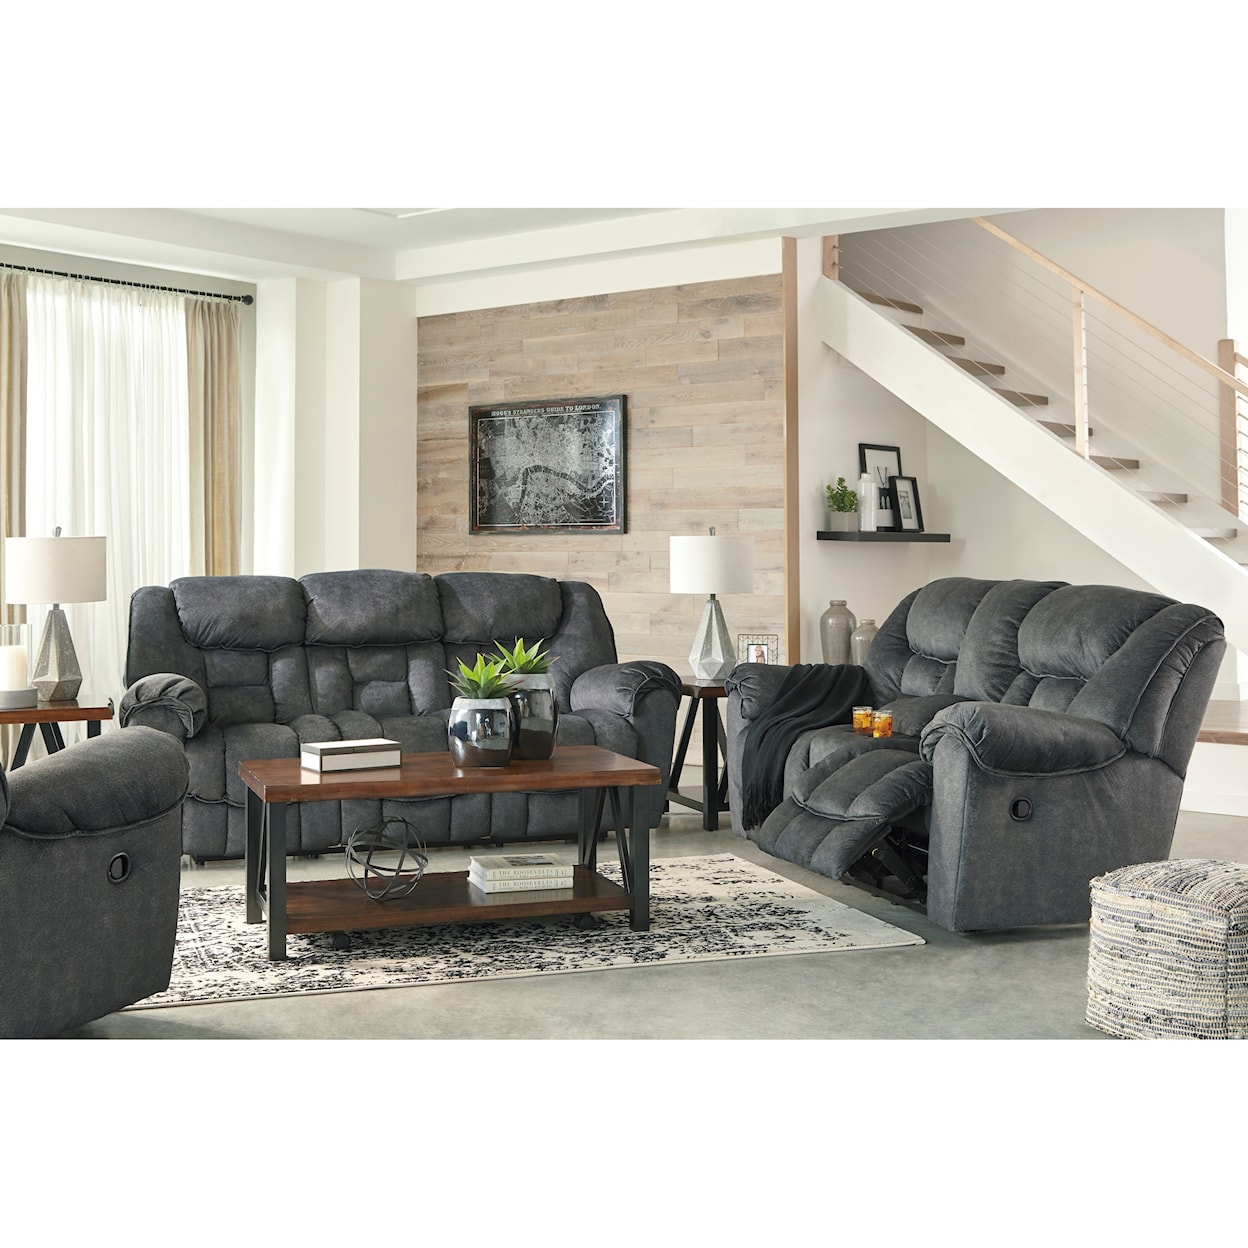 Signature Design by Ashley Capehorn Reclining Living Room Group